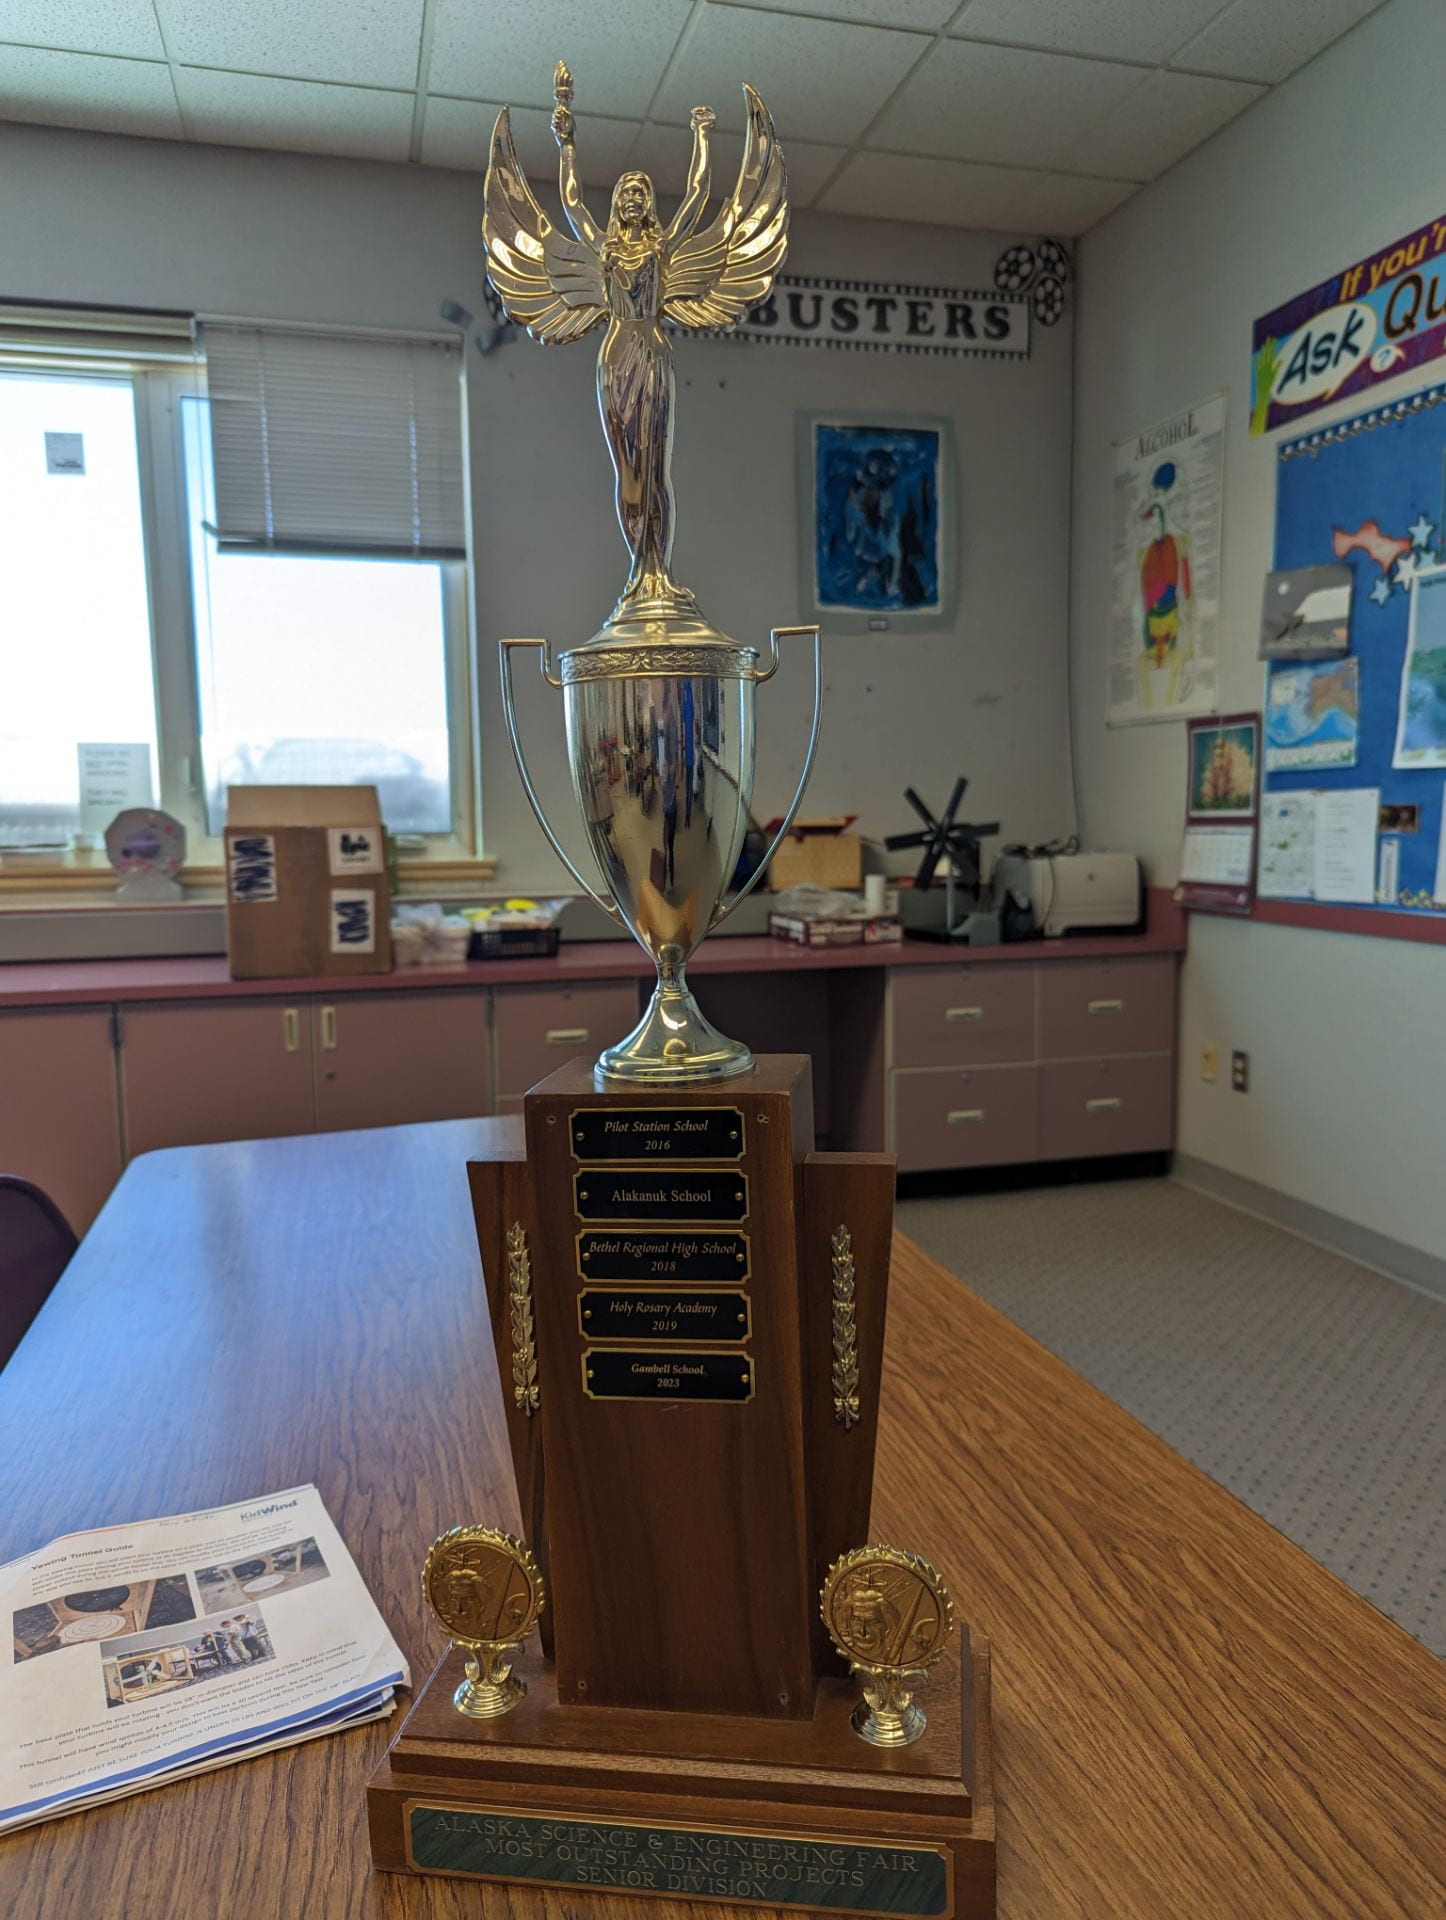 A large trophy topped with a winged figure sitting on a classroom desk.